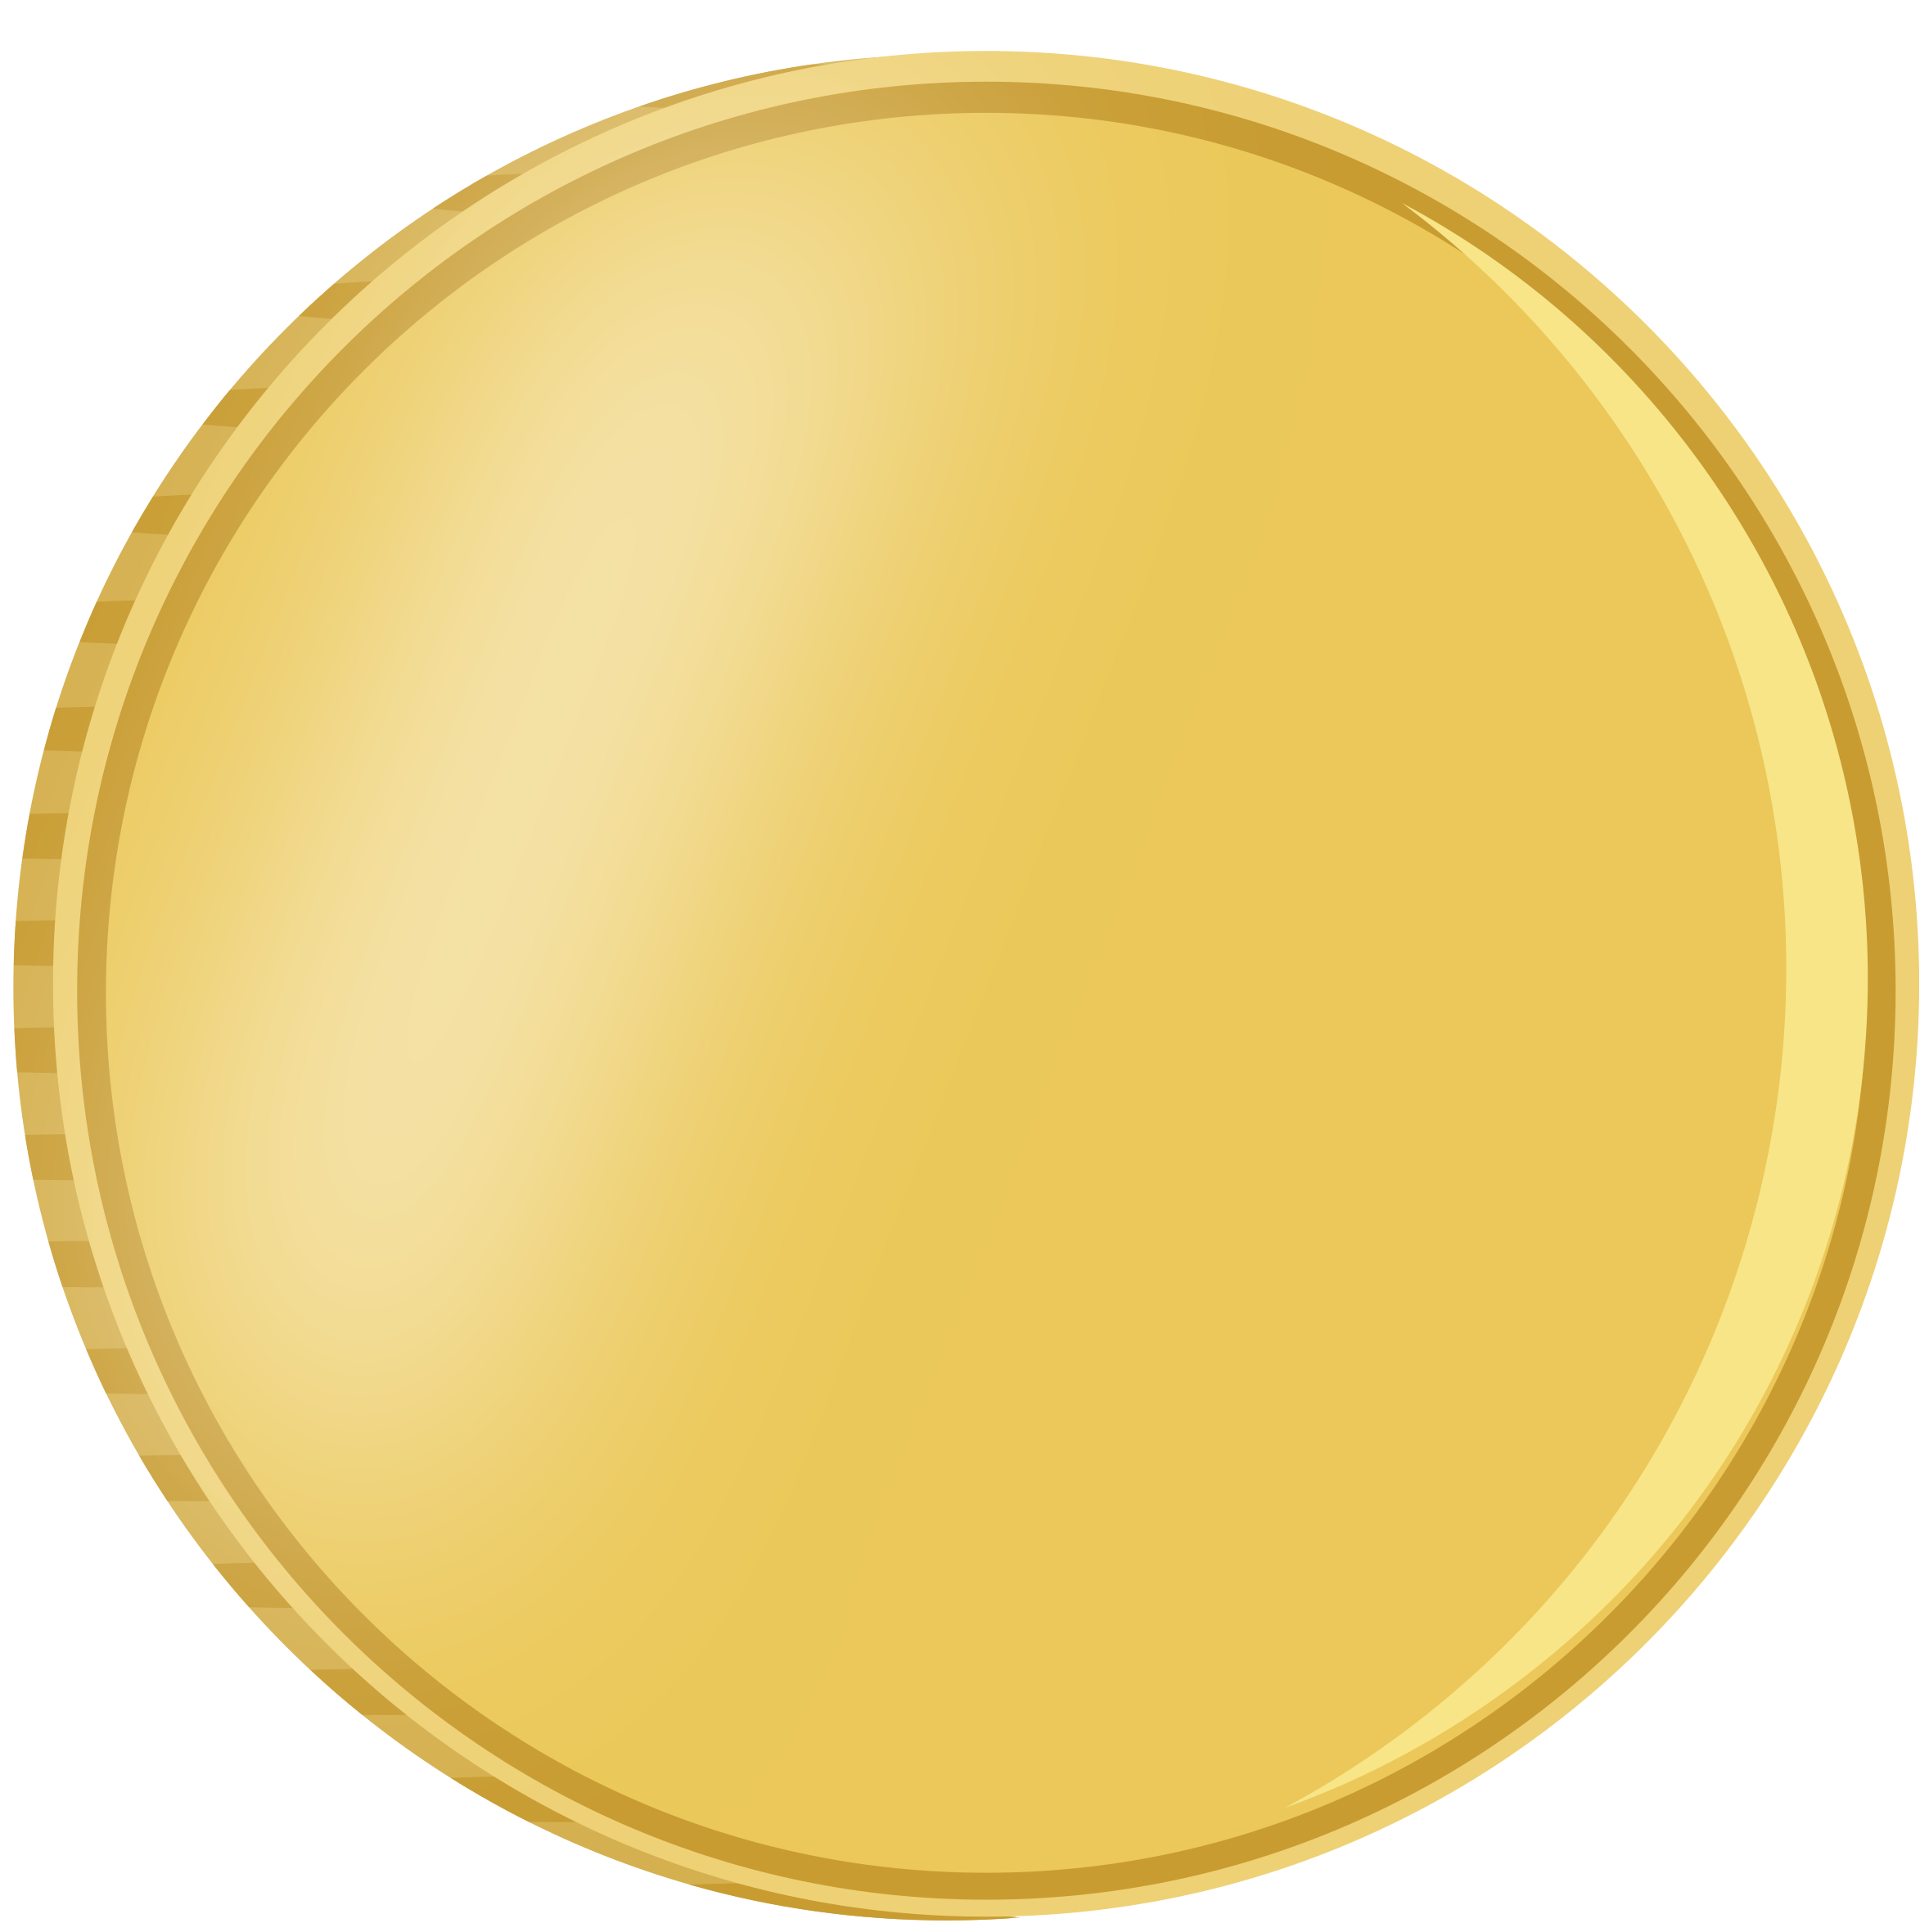 A Gold Coin With A Black Background